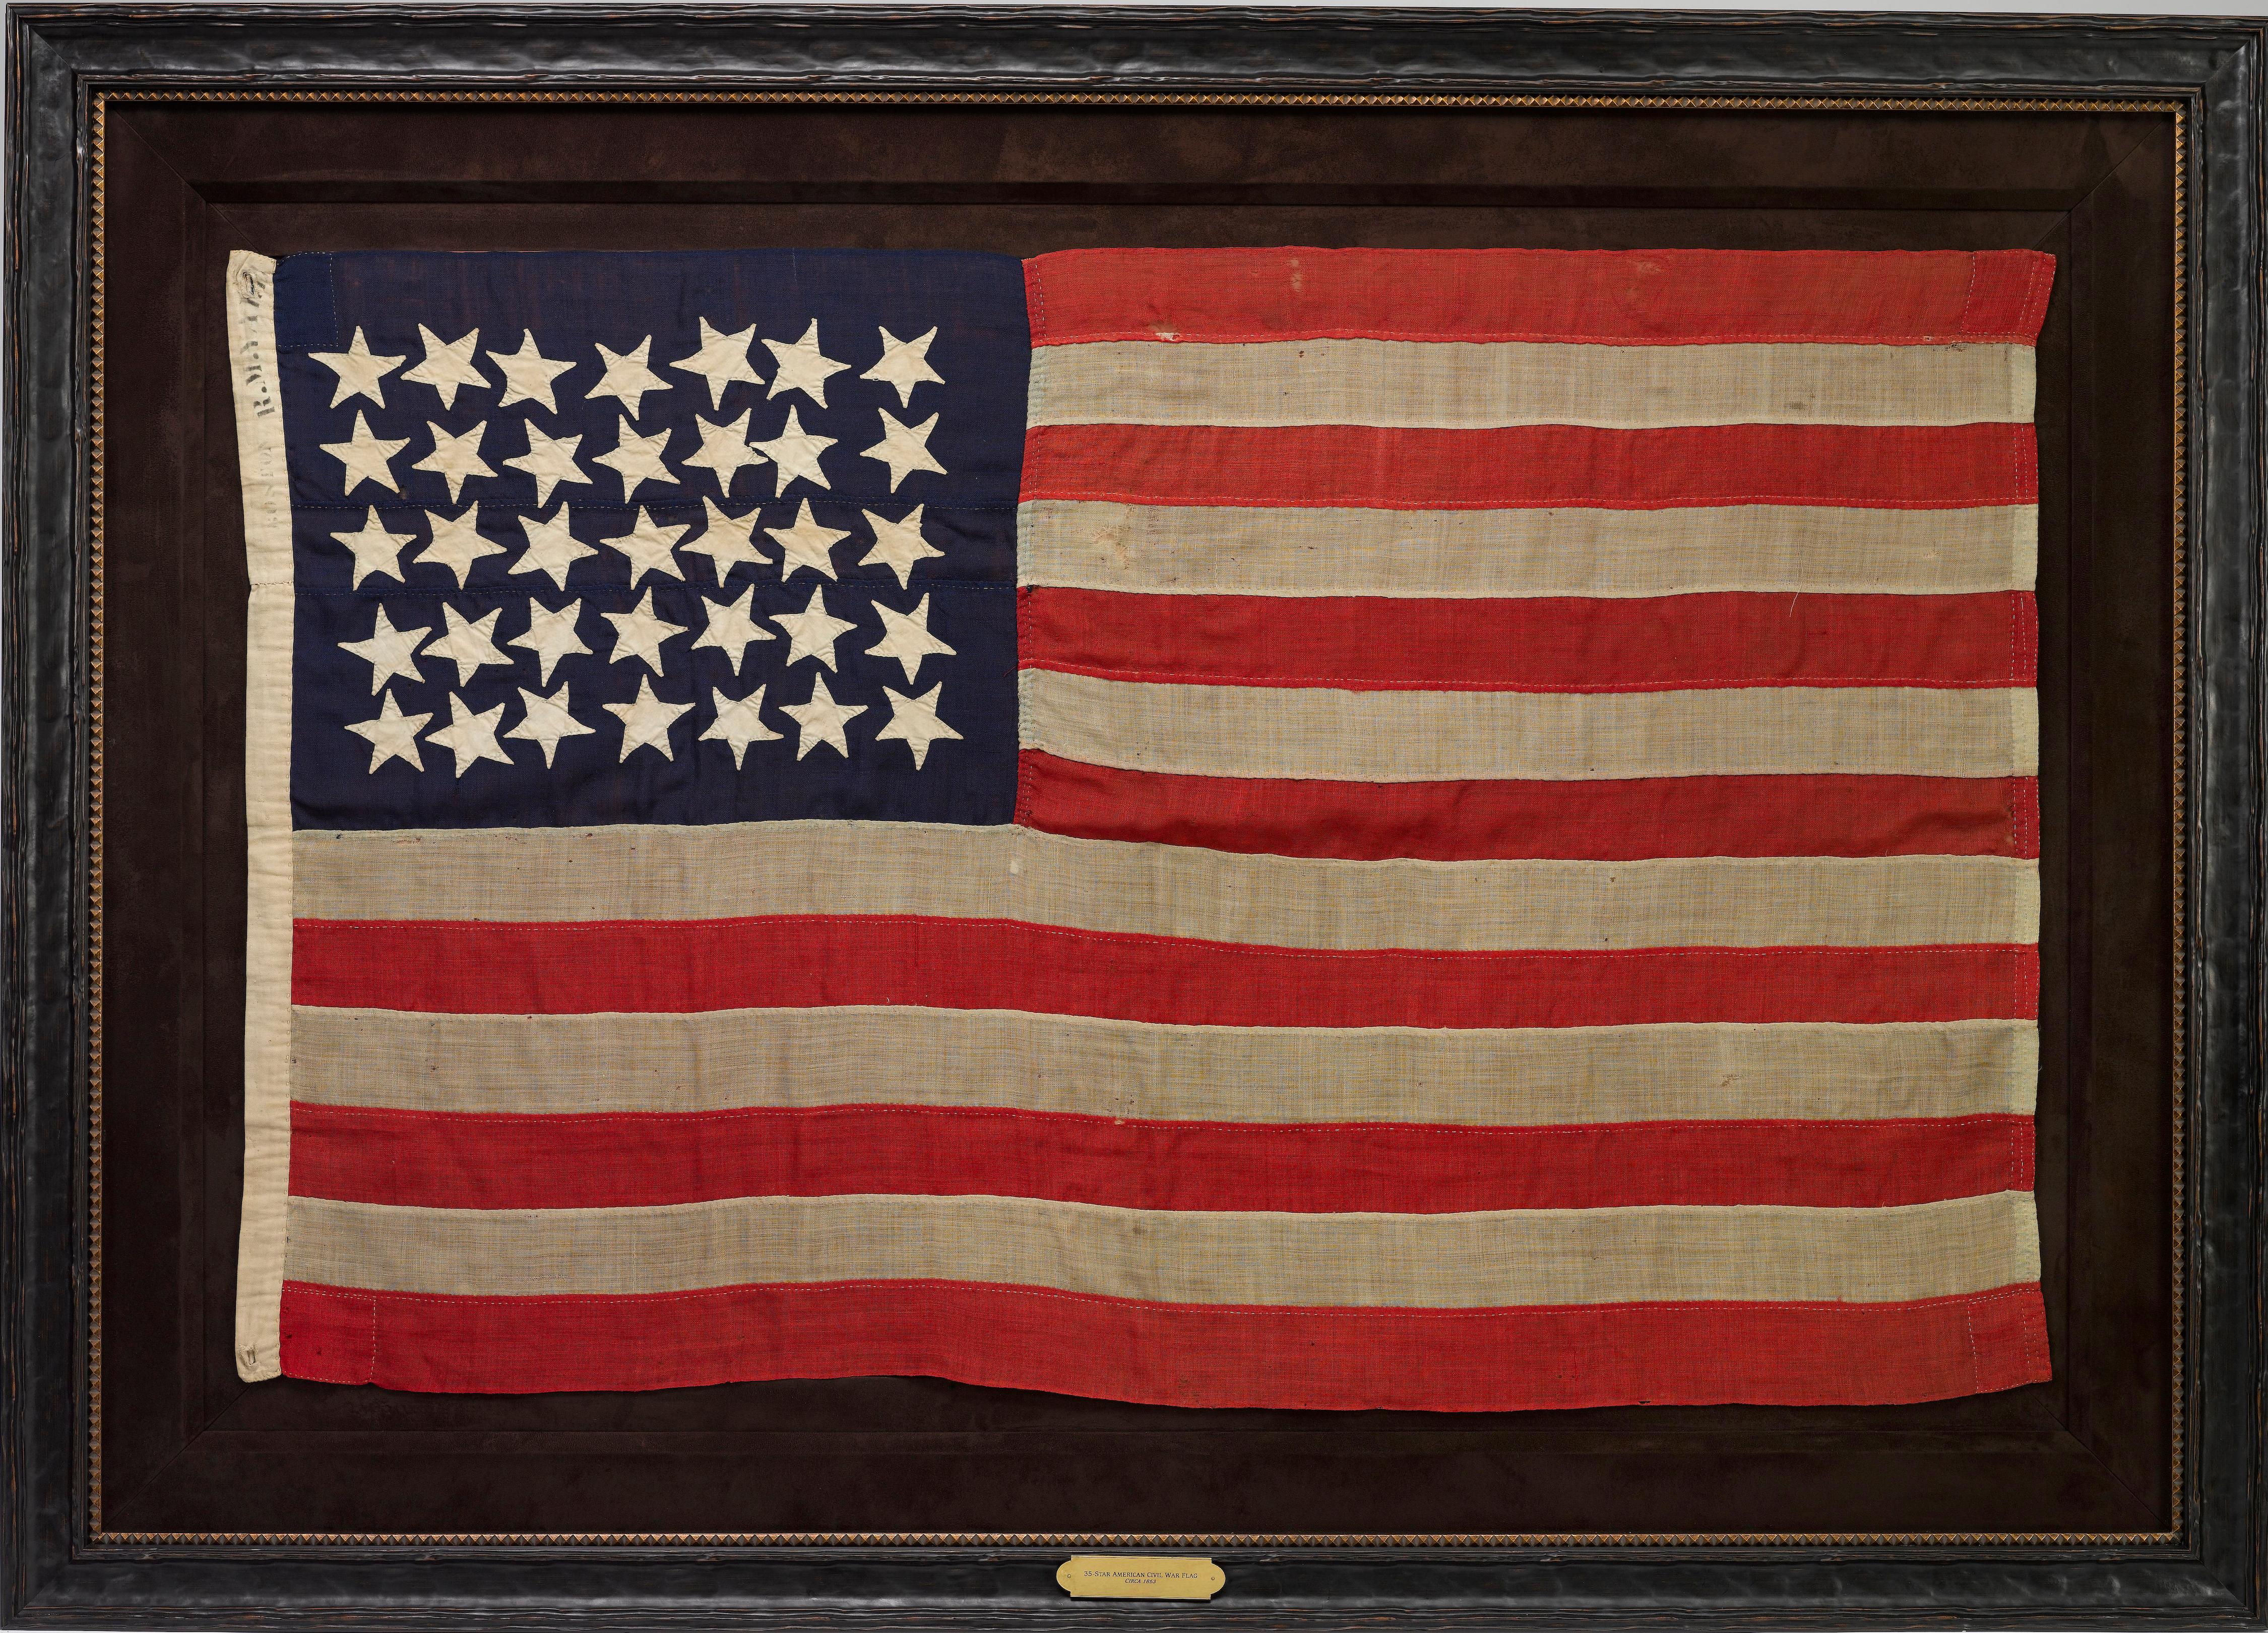 This is a beautifully hand-cut and sewn 35-star American flag, representing the addition of West Virginia to the Union. West Virginia joined the Union on June 20, 1863. Because 35-star flags were produced for less than a year and a half, they are